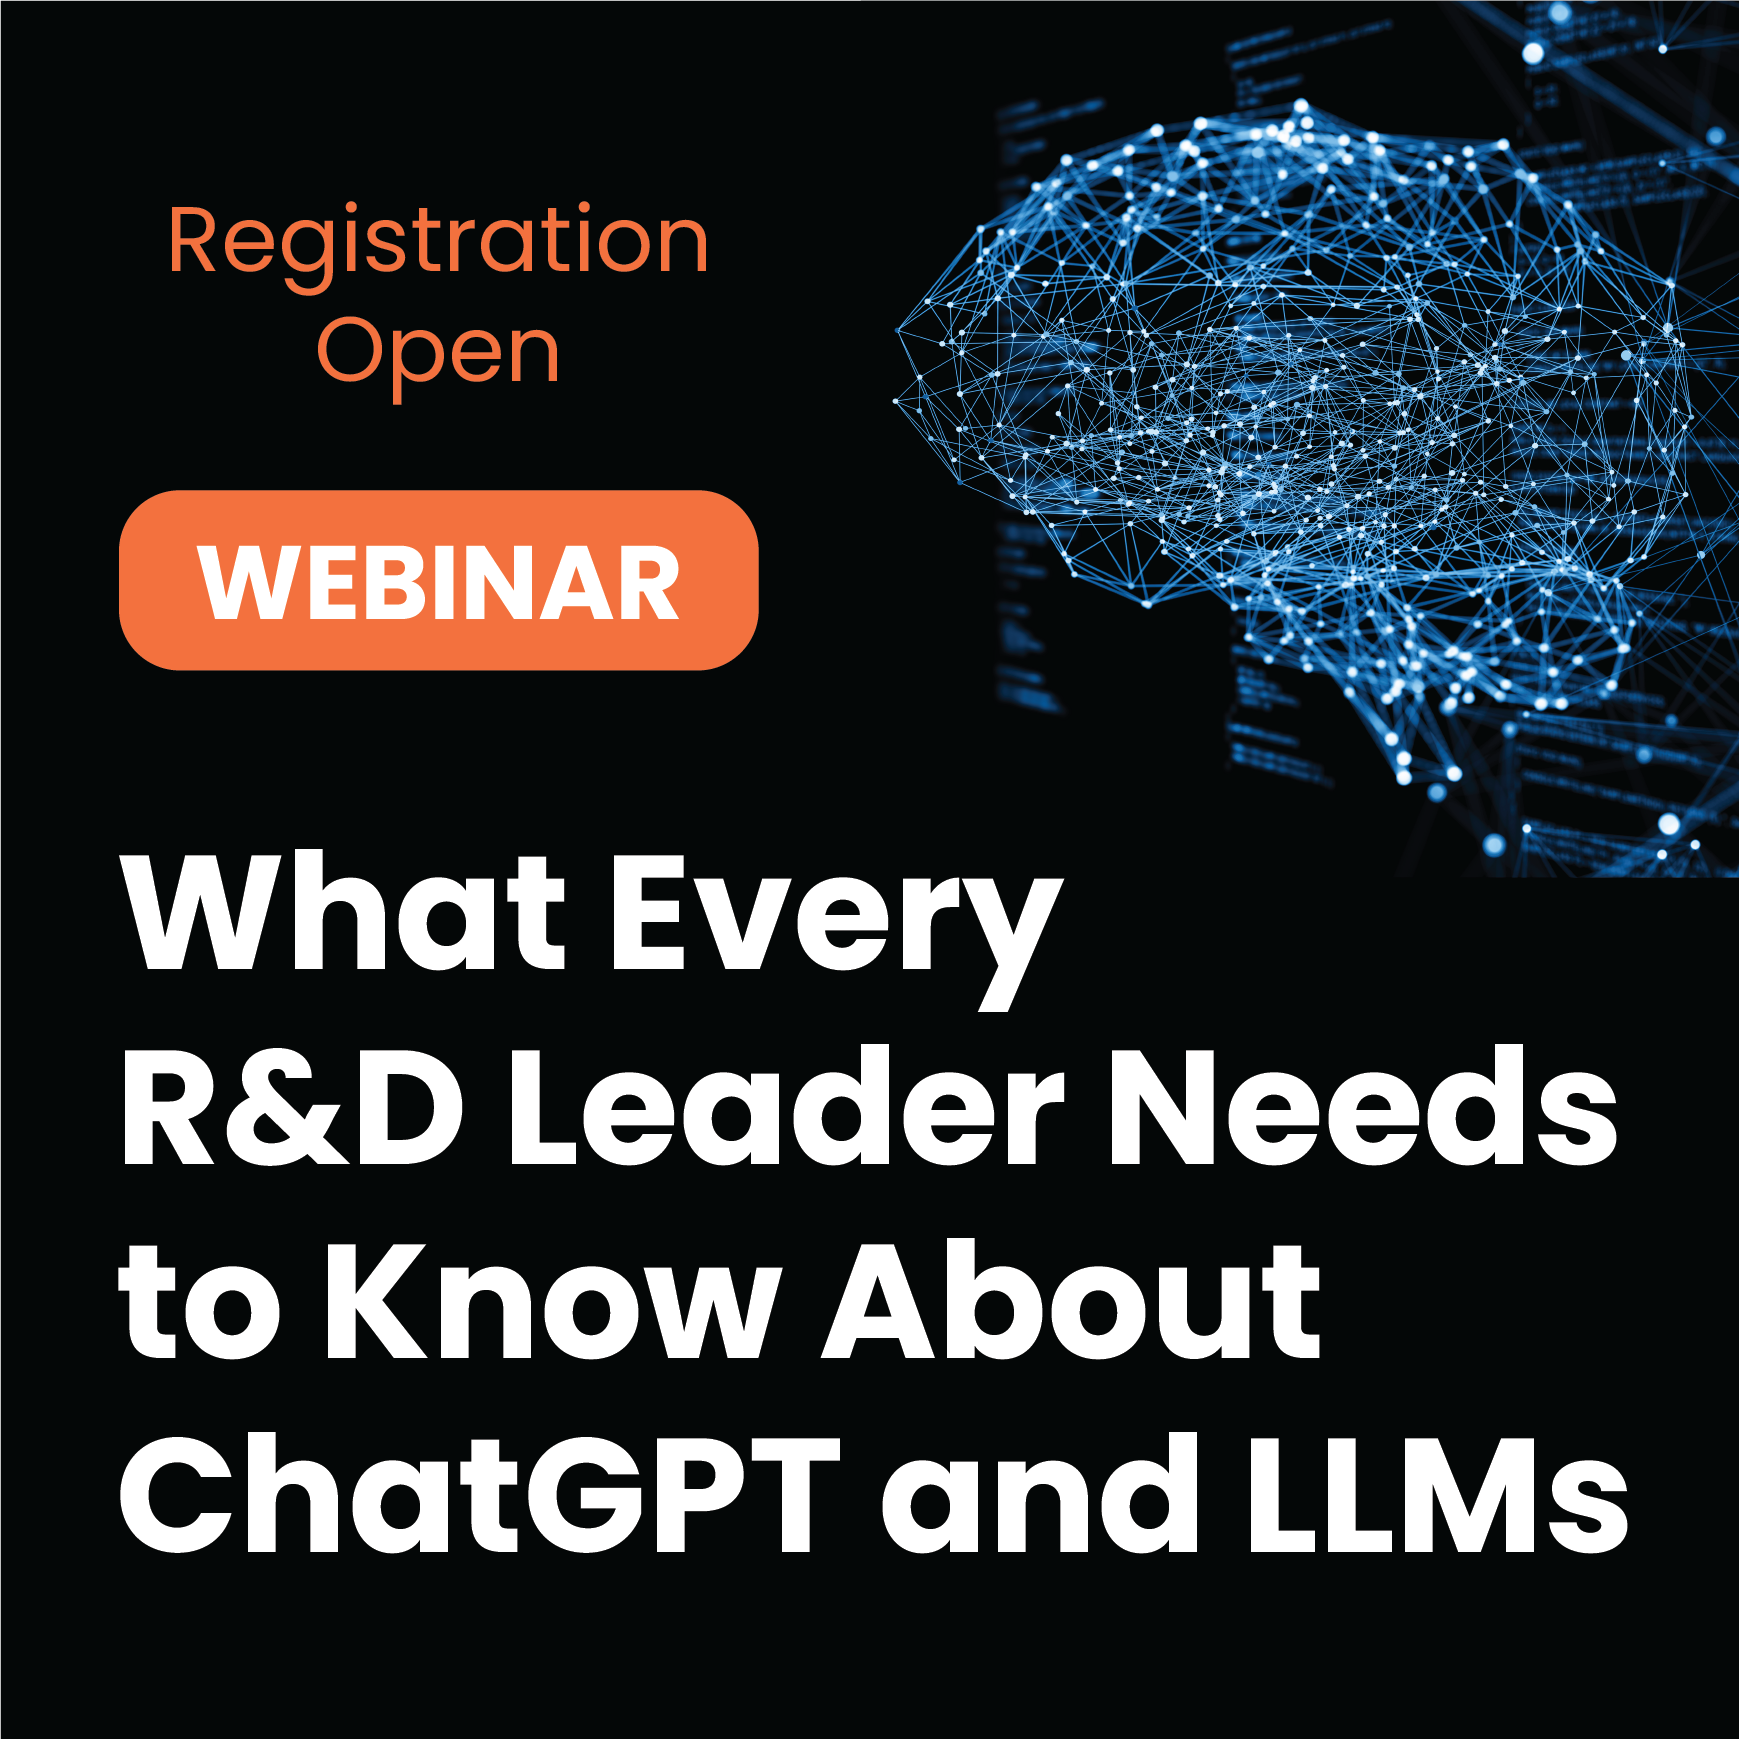 Webinar: What Every R&D Leader Needs to Know About ChatGPT and LLMs